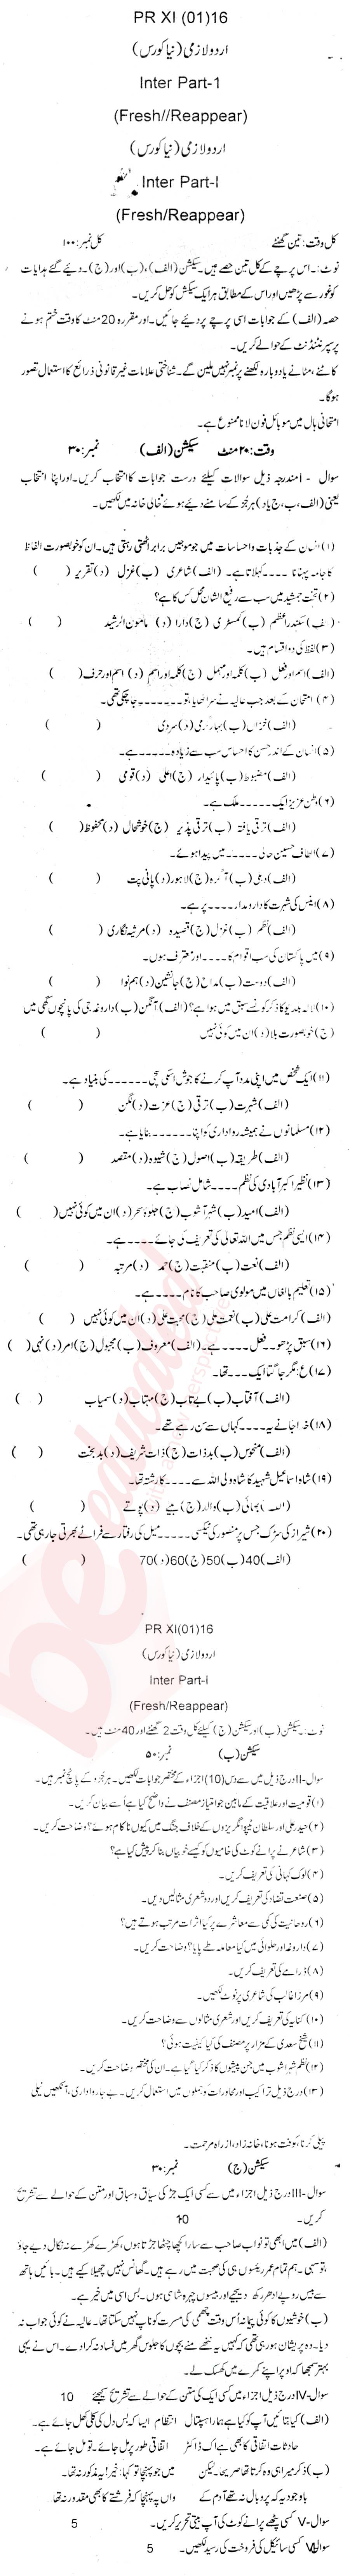 Urdu 11th class Past Paper Group 1 BISE Abbottabad 2016